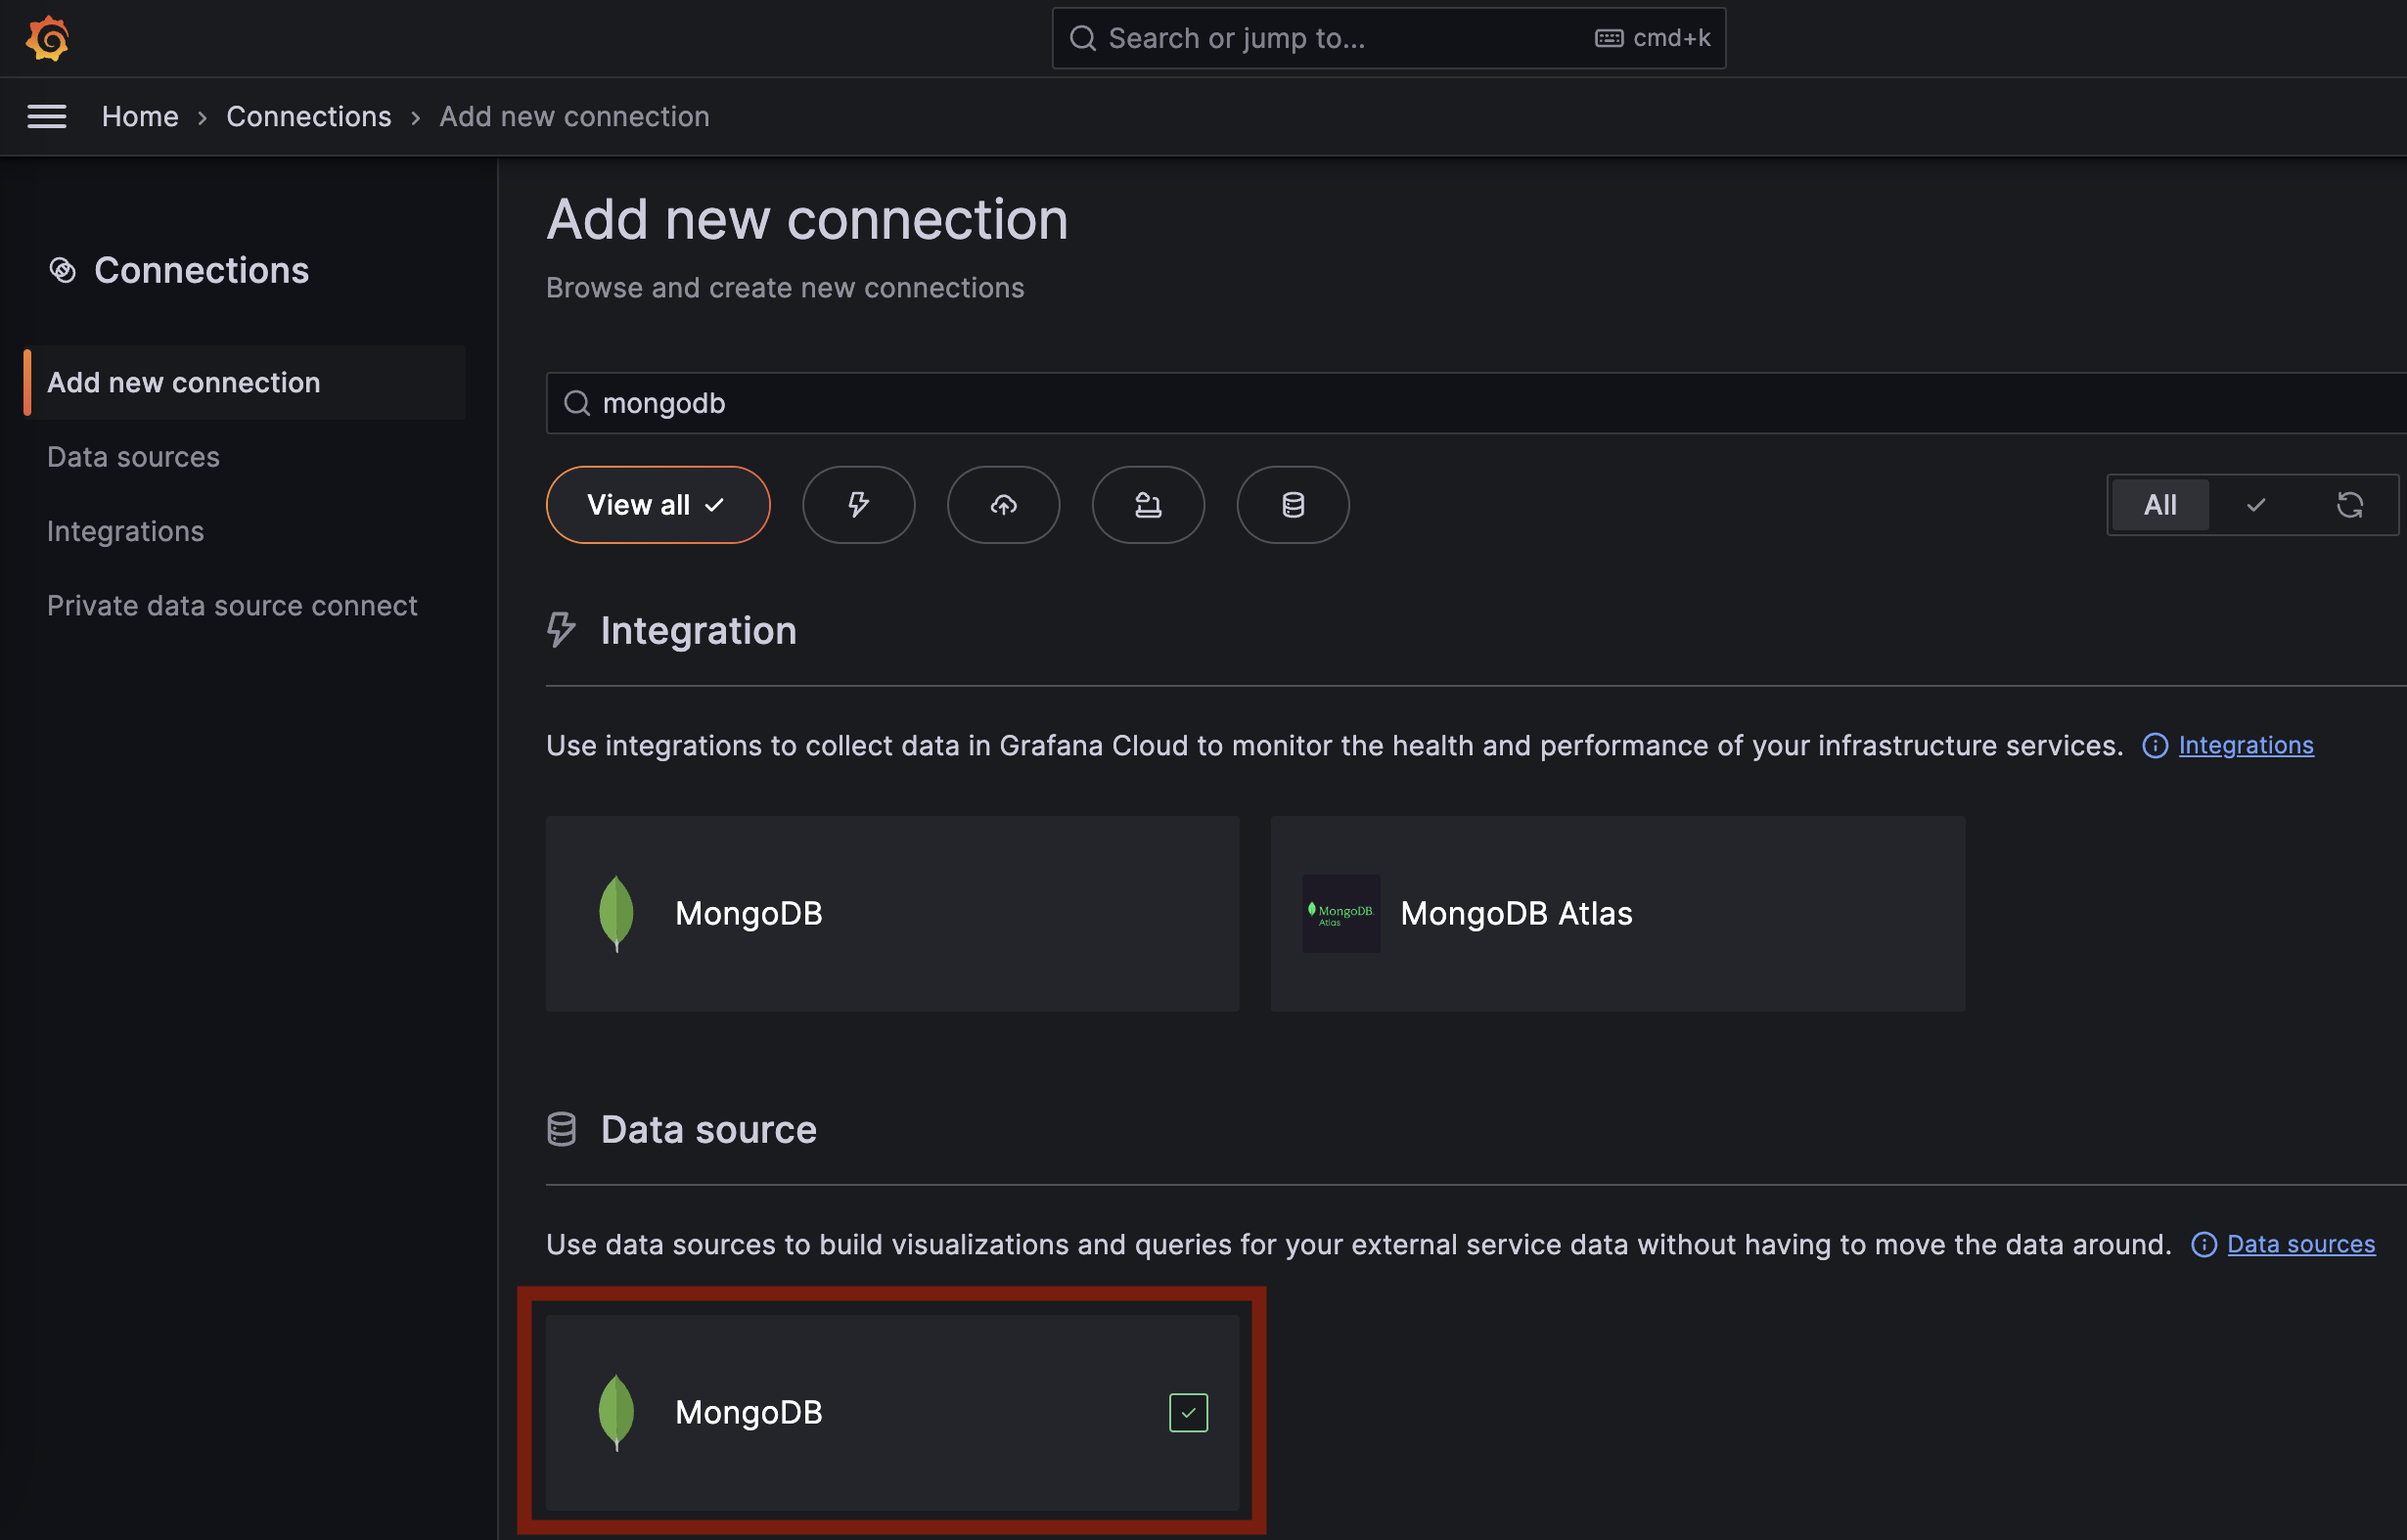 The Grafana configuration page for adding a new connection, with the MongoDB data source shown